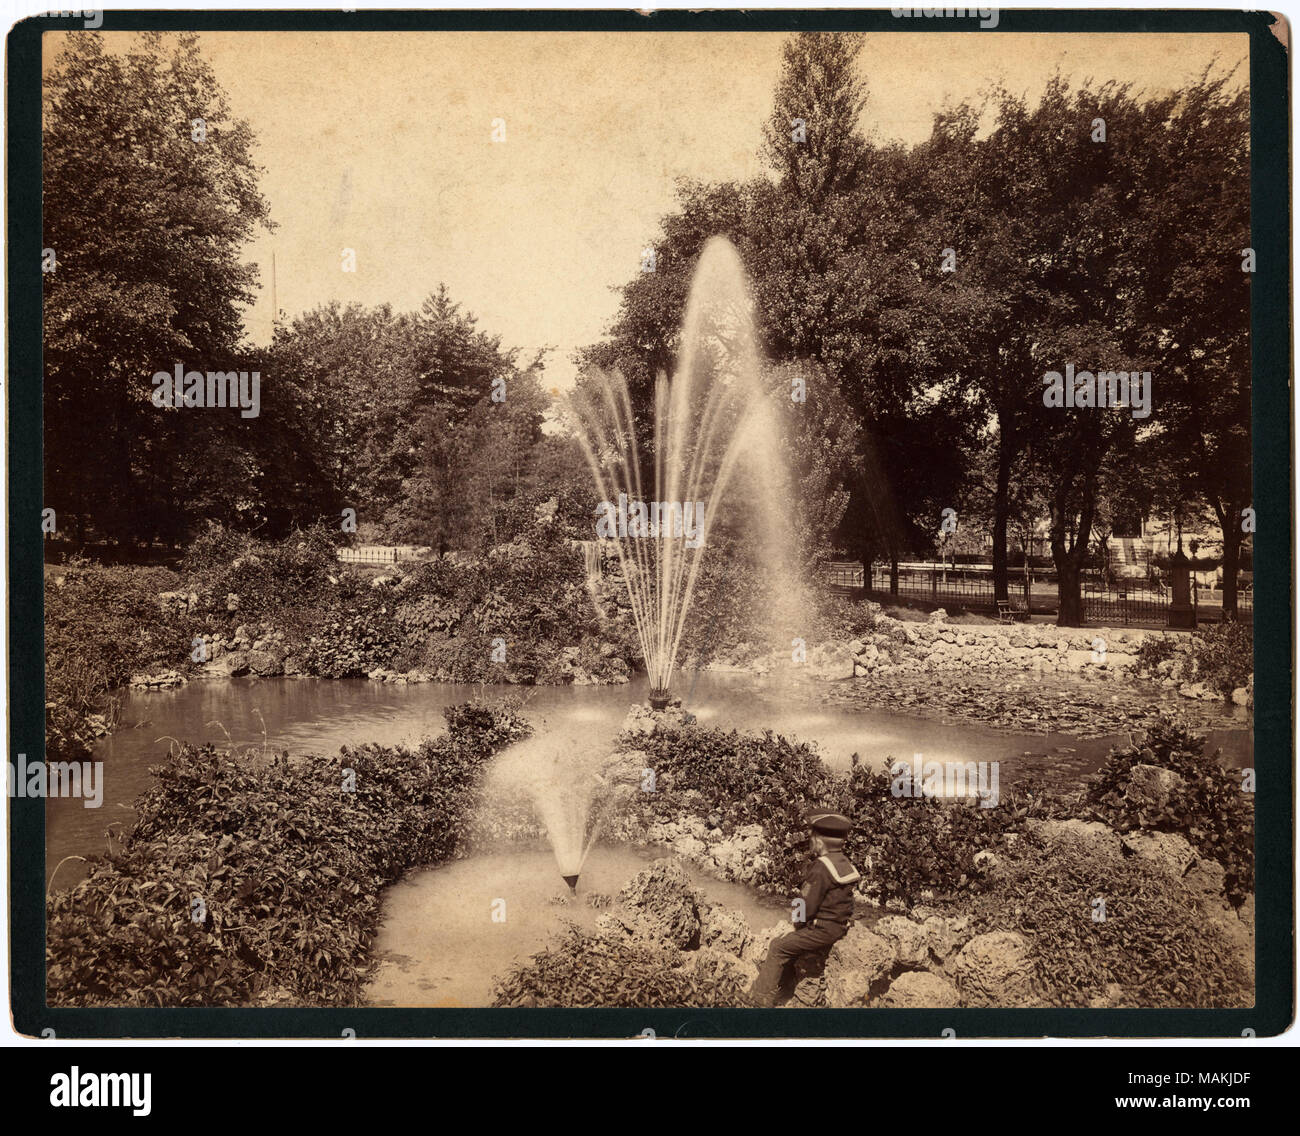 Horizontal, sepia photograph showing the rock garden at Lafayette Park. Rocks and foliage line the edges of a small pond with fountains in the center. A small boy in a sailor suit watches the fountains from a perch among the rocks. Large trees and a wrought-iron fence can be seen in the background. The back of the print has stamps from photographer Robert E. M. Bain and the St. Louis Globe Democrat. The Globe stamp indicates that the photograph appeared in the Gravure Section on December 4th, although there is no year given. A handwritten note, probably from Dr. William G. Swekosky, reads: 'Ra Stock Photo